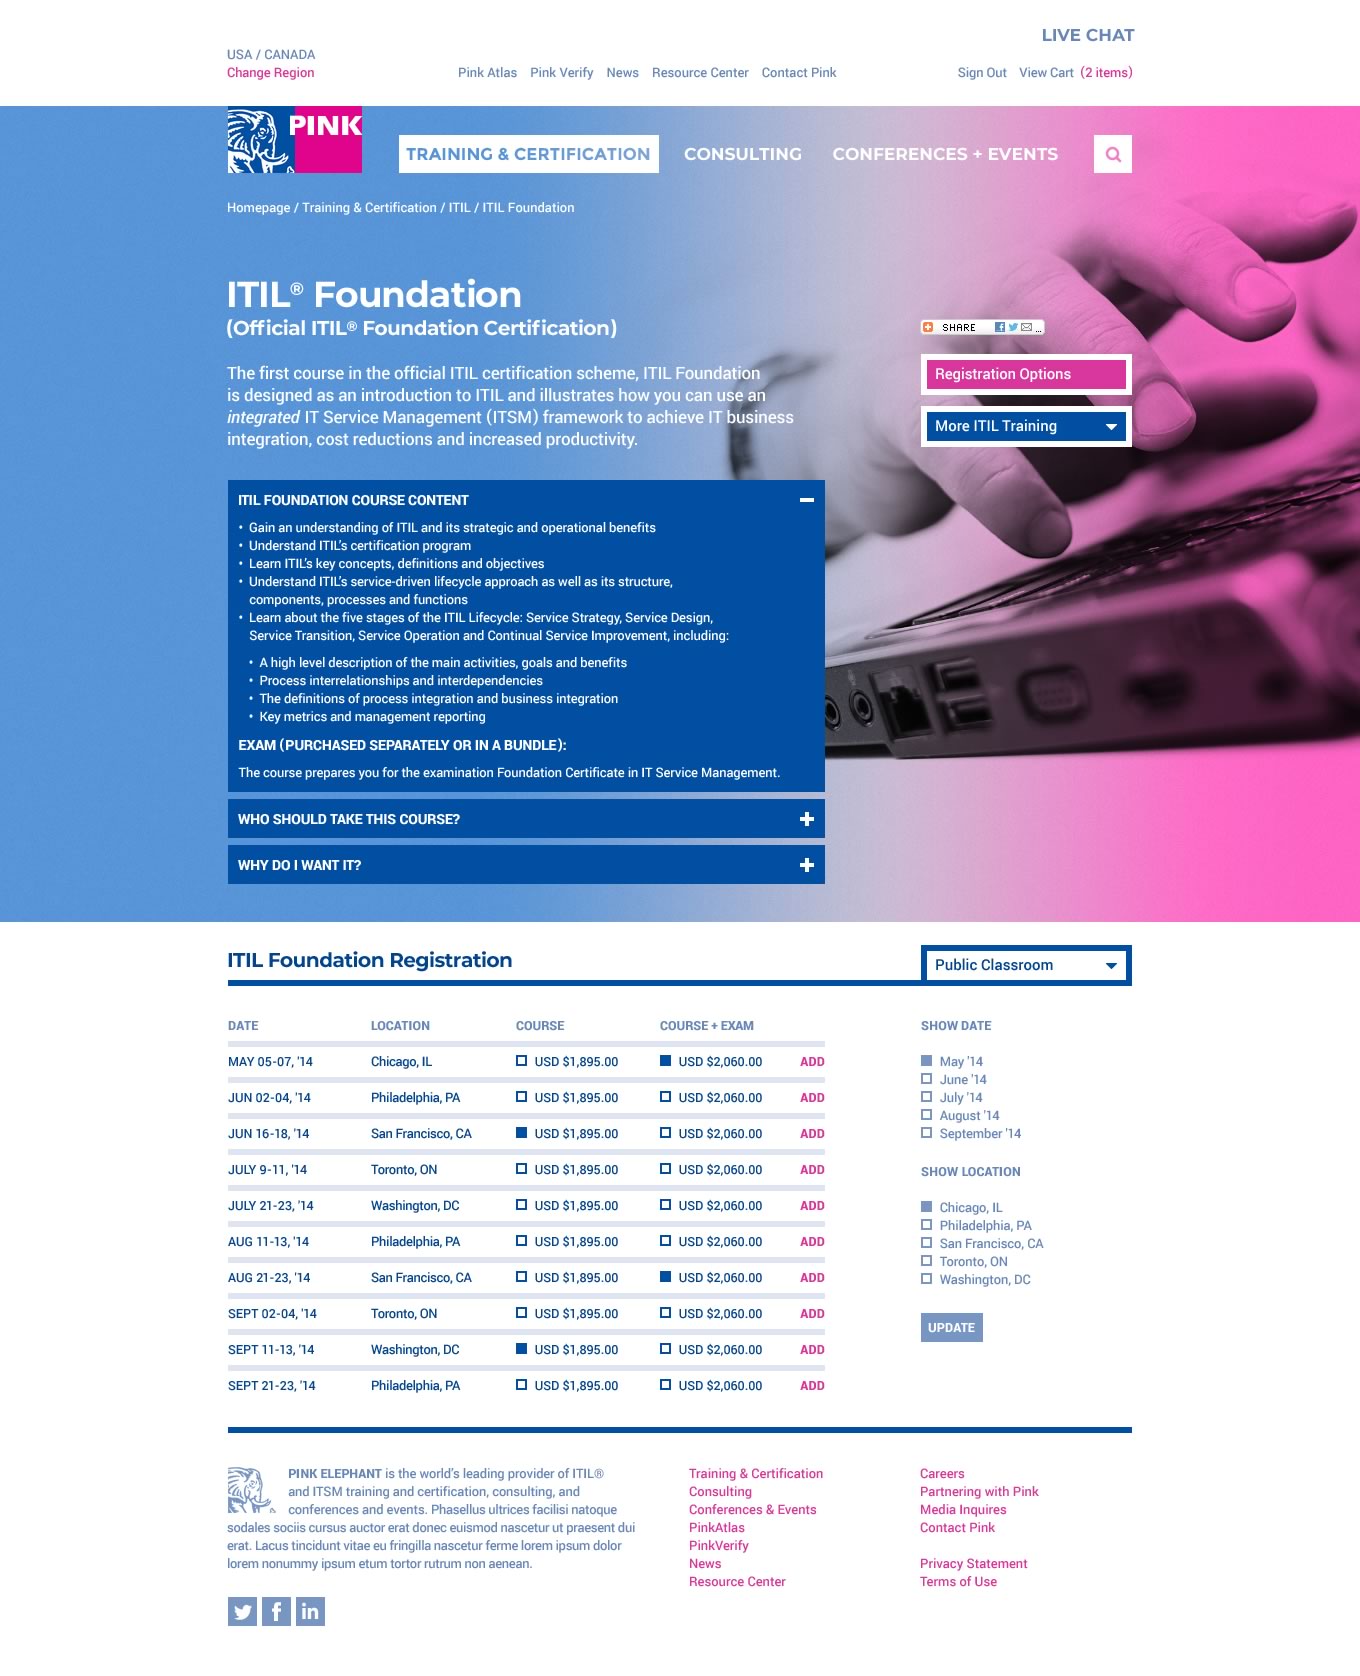 Capture of the full 'ITIL Foundation' page from the Pink Elephant website (Registration details exposed)